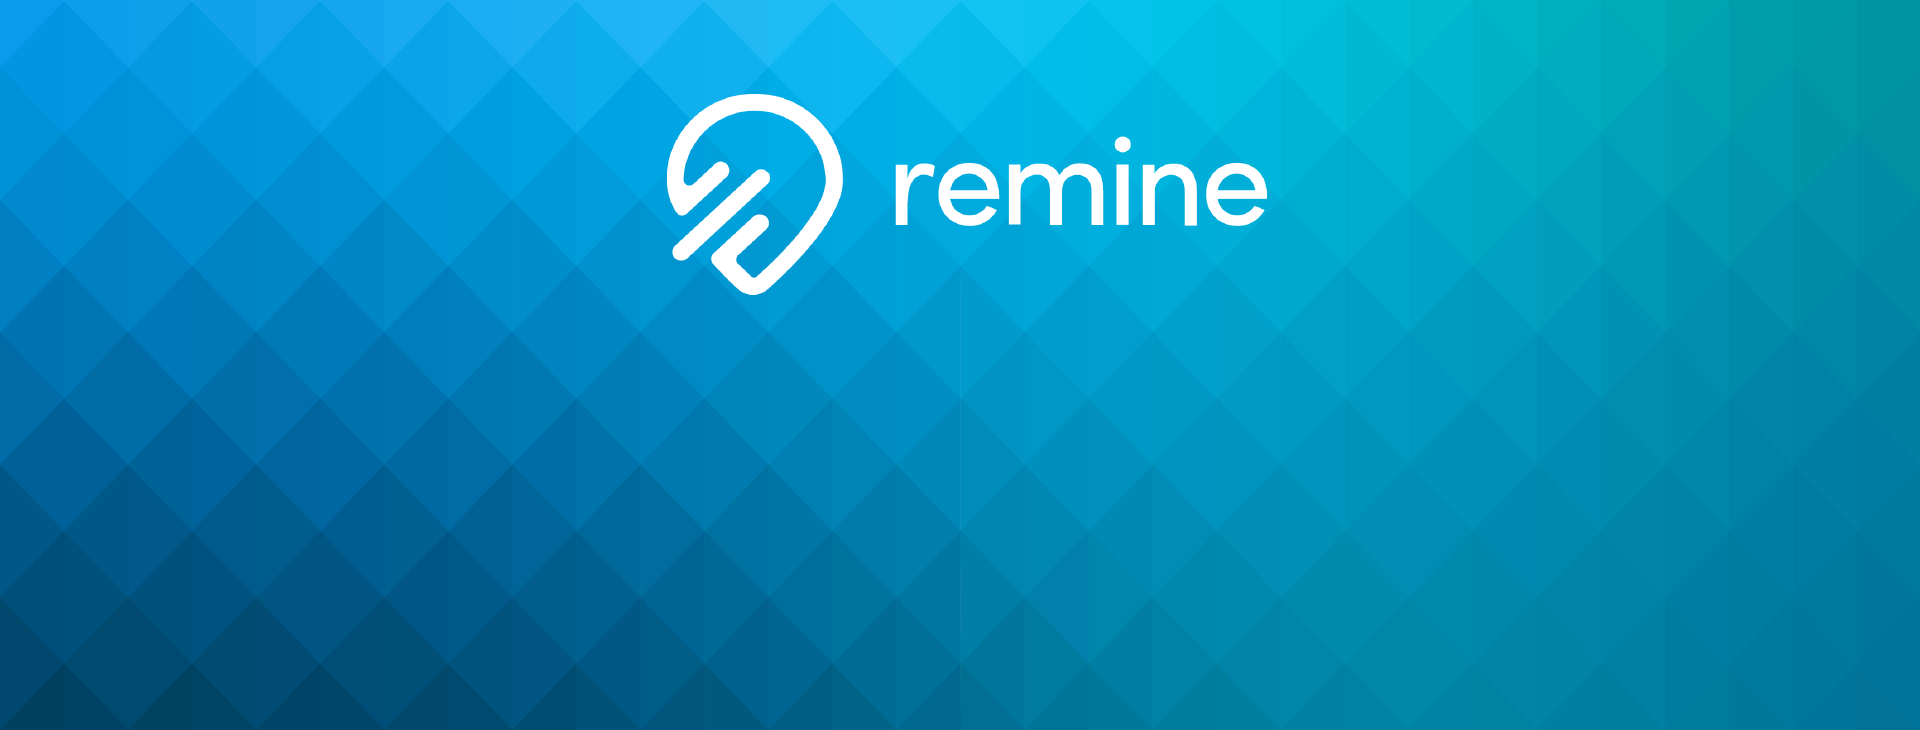 Image for Remine Platform Enhancements and New CRE Features